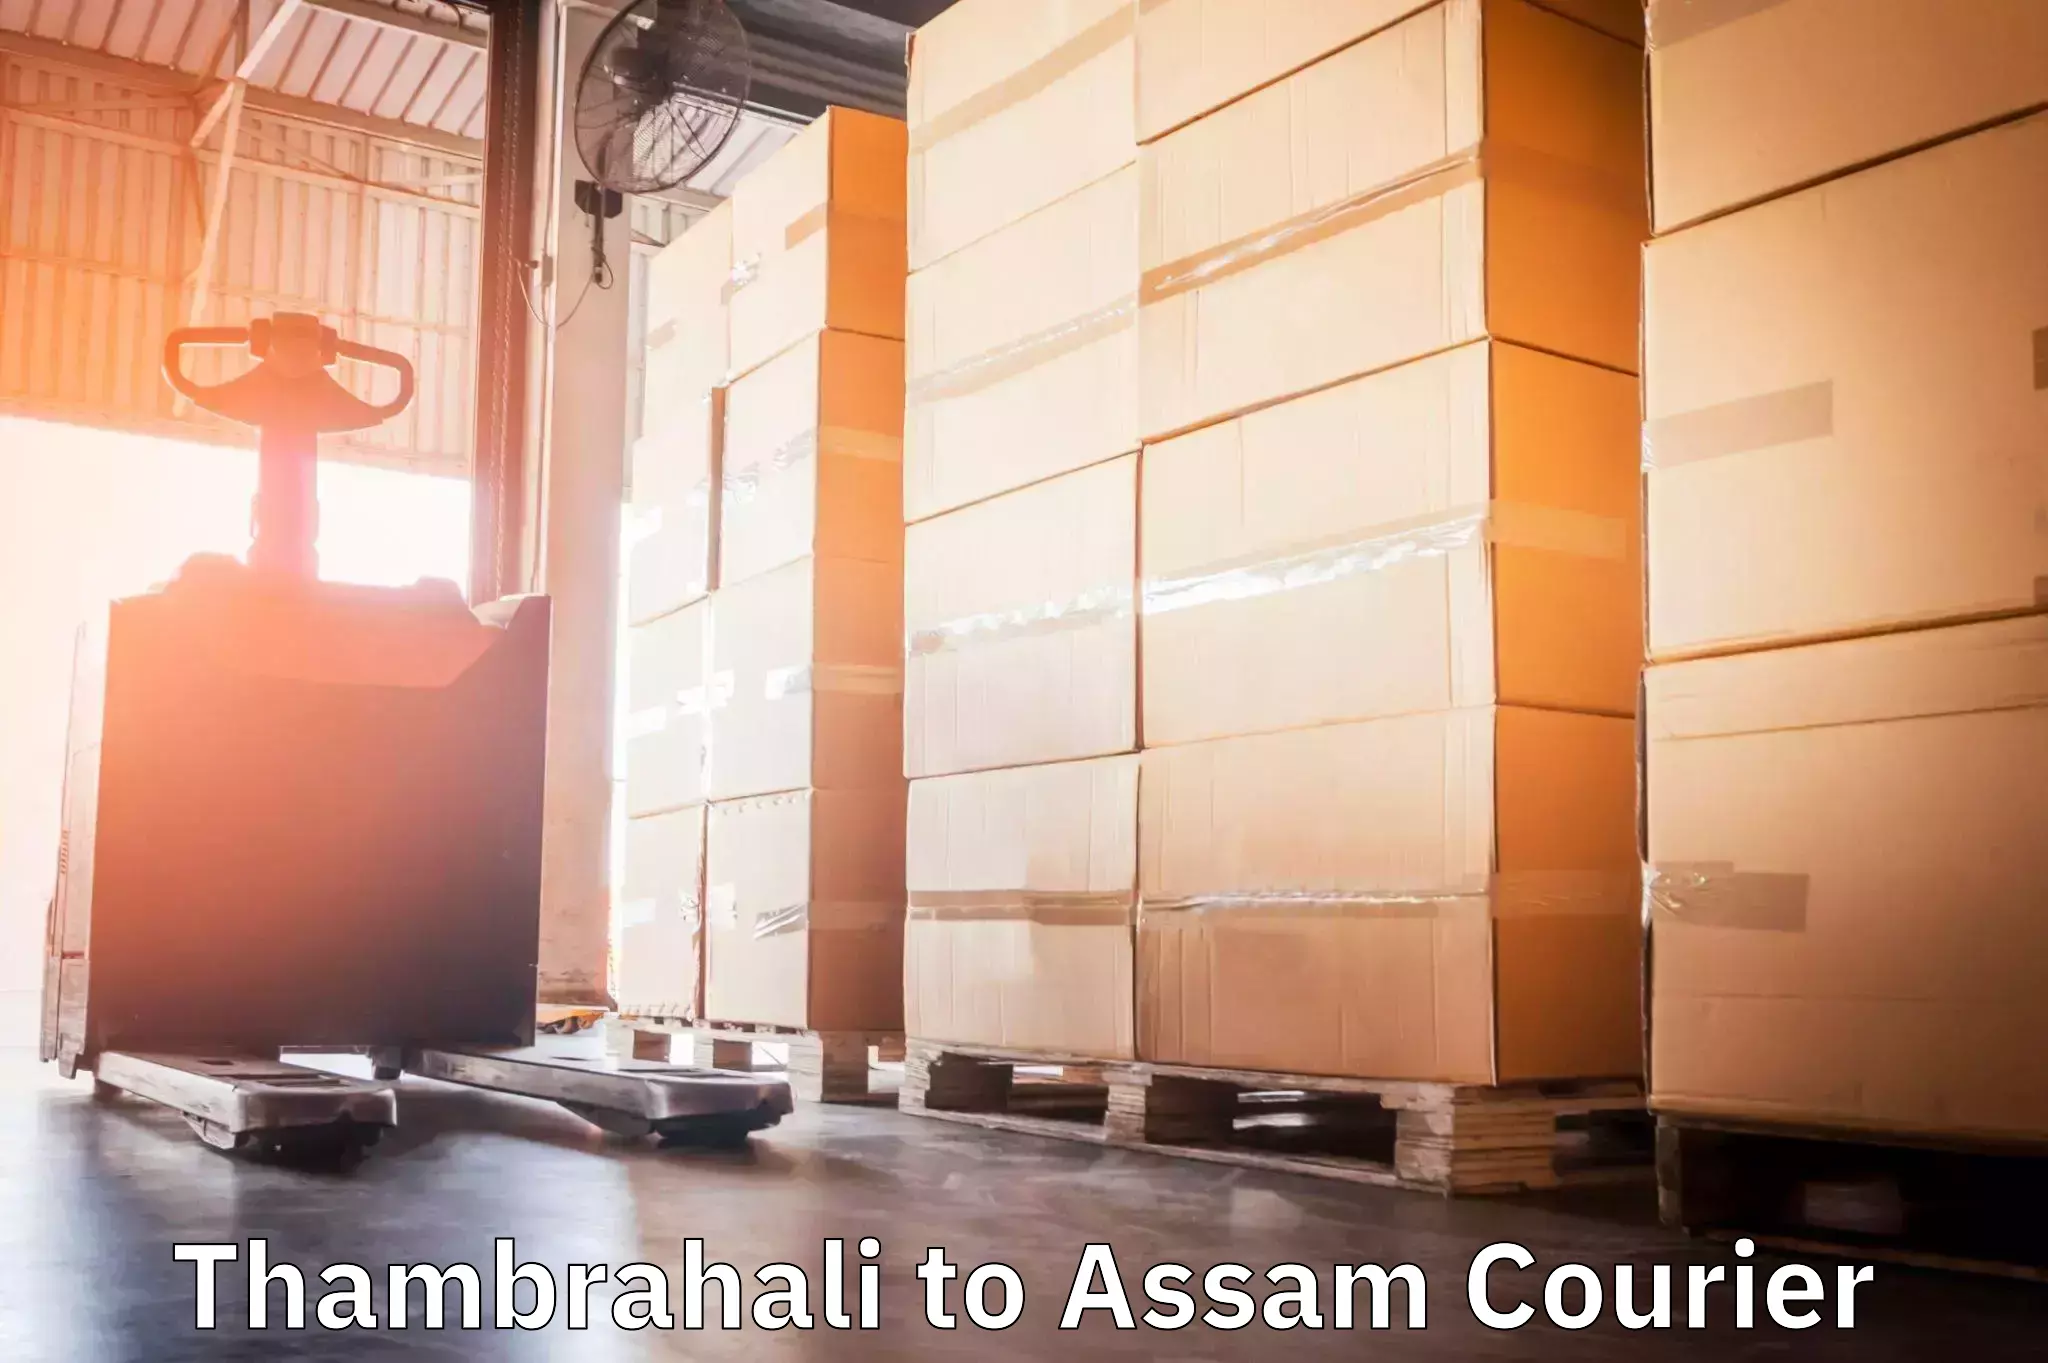 Residential courier service Thambrahali to Assam